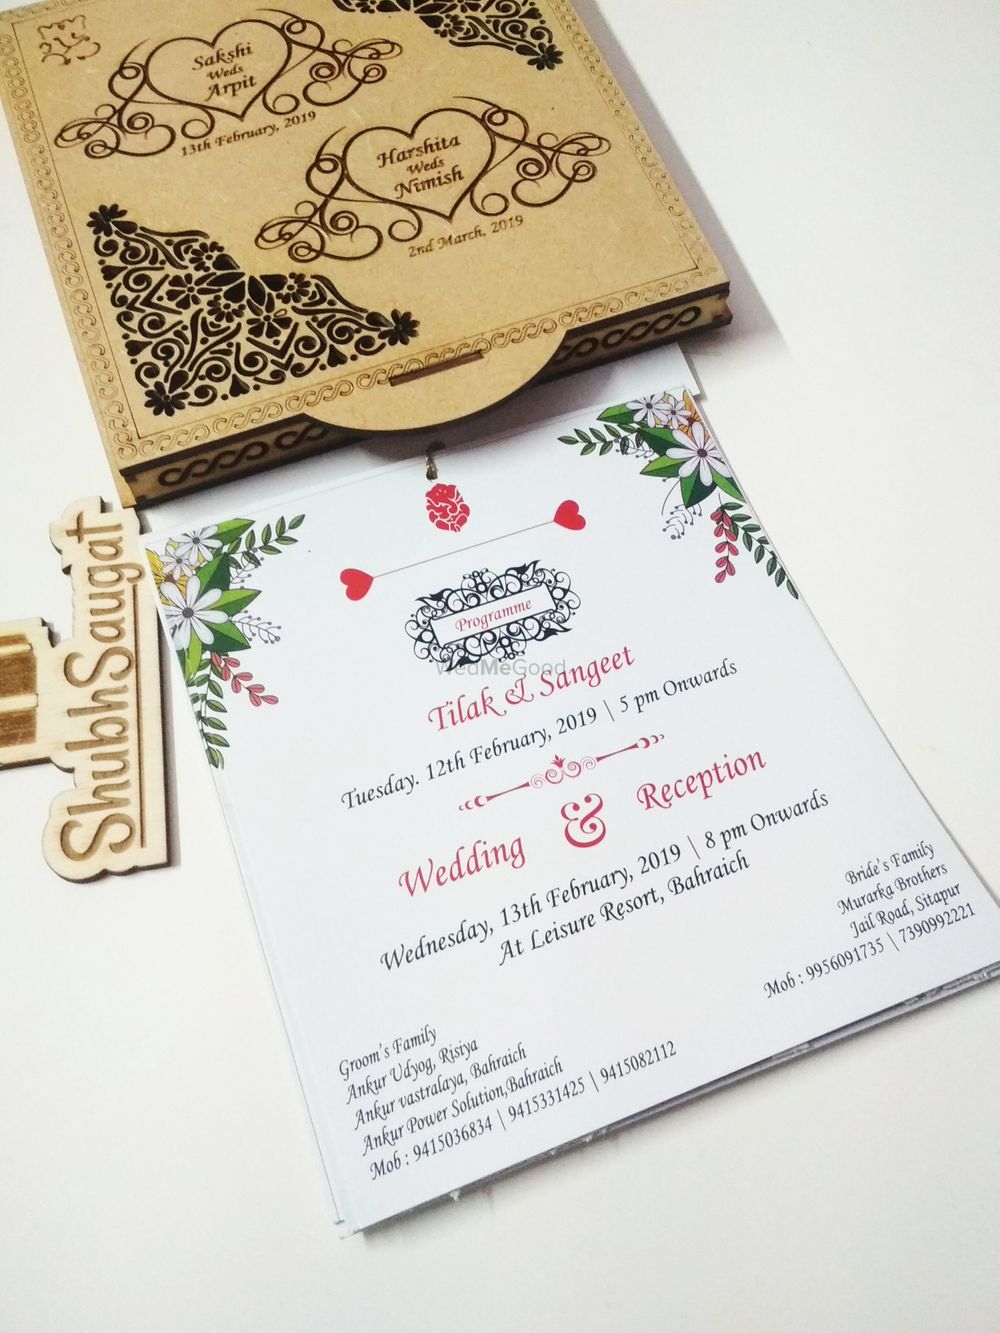 Photo From wedding box invite - By ShubhSaugaat